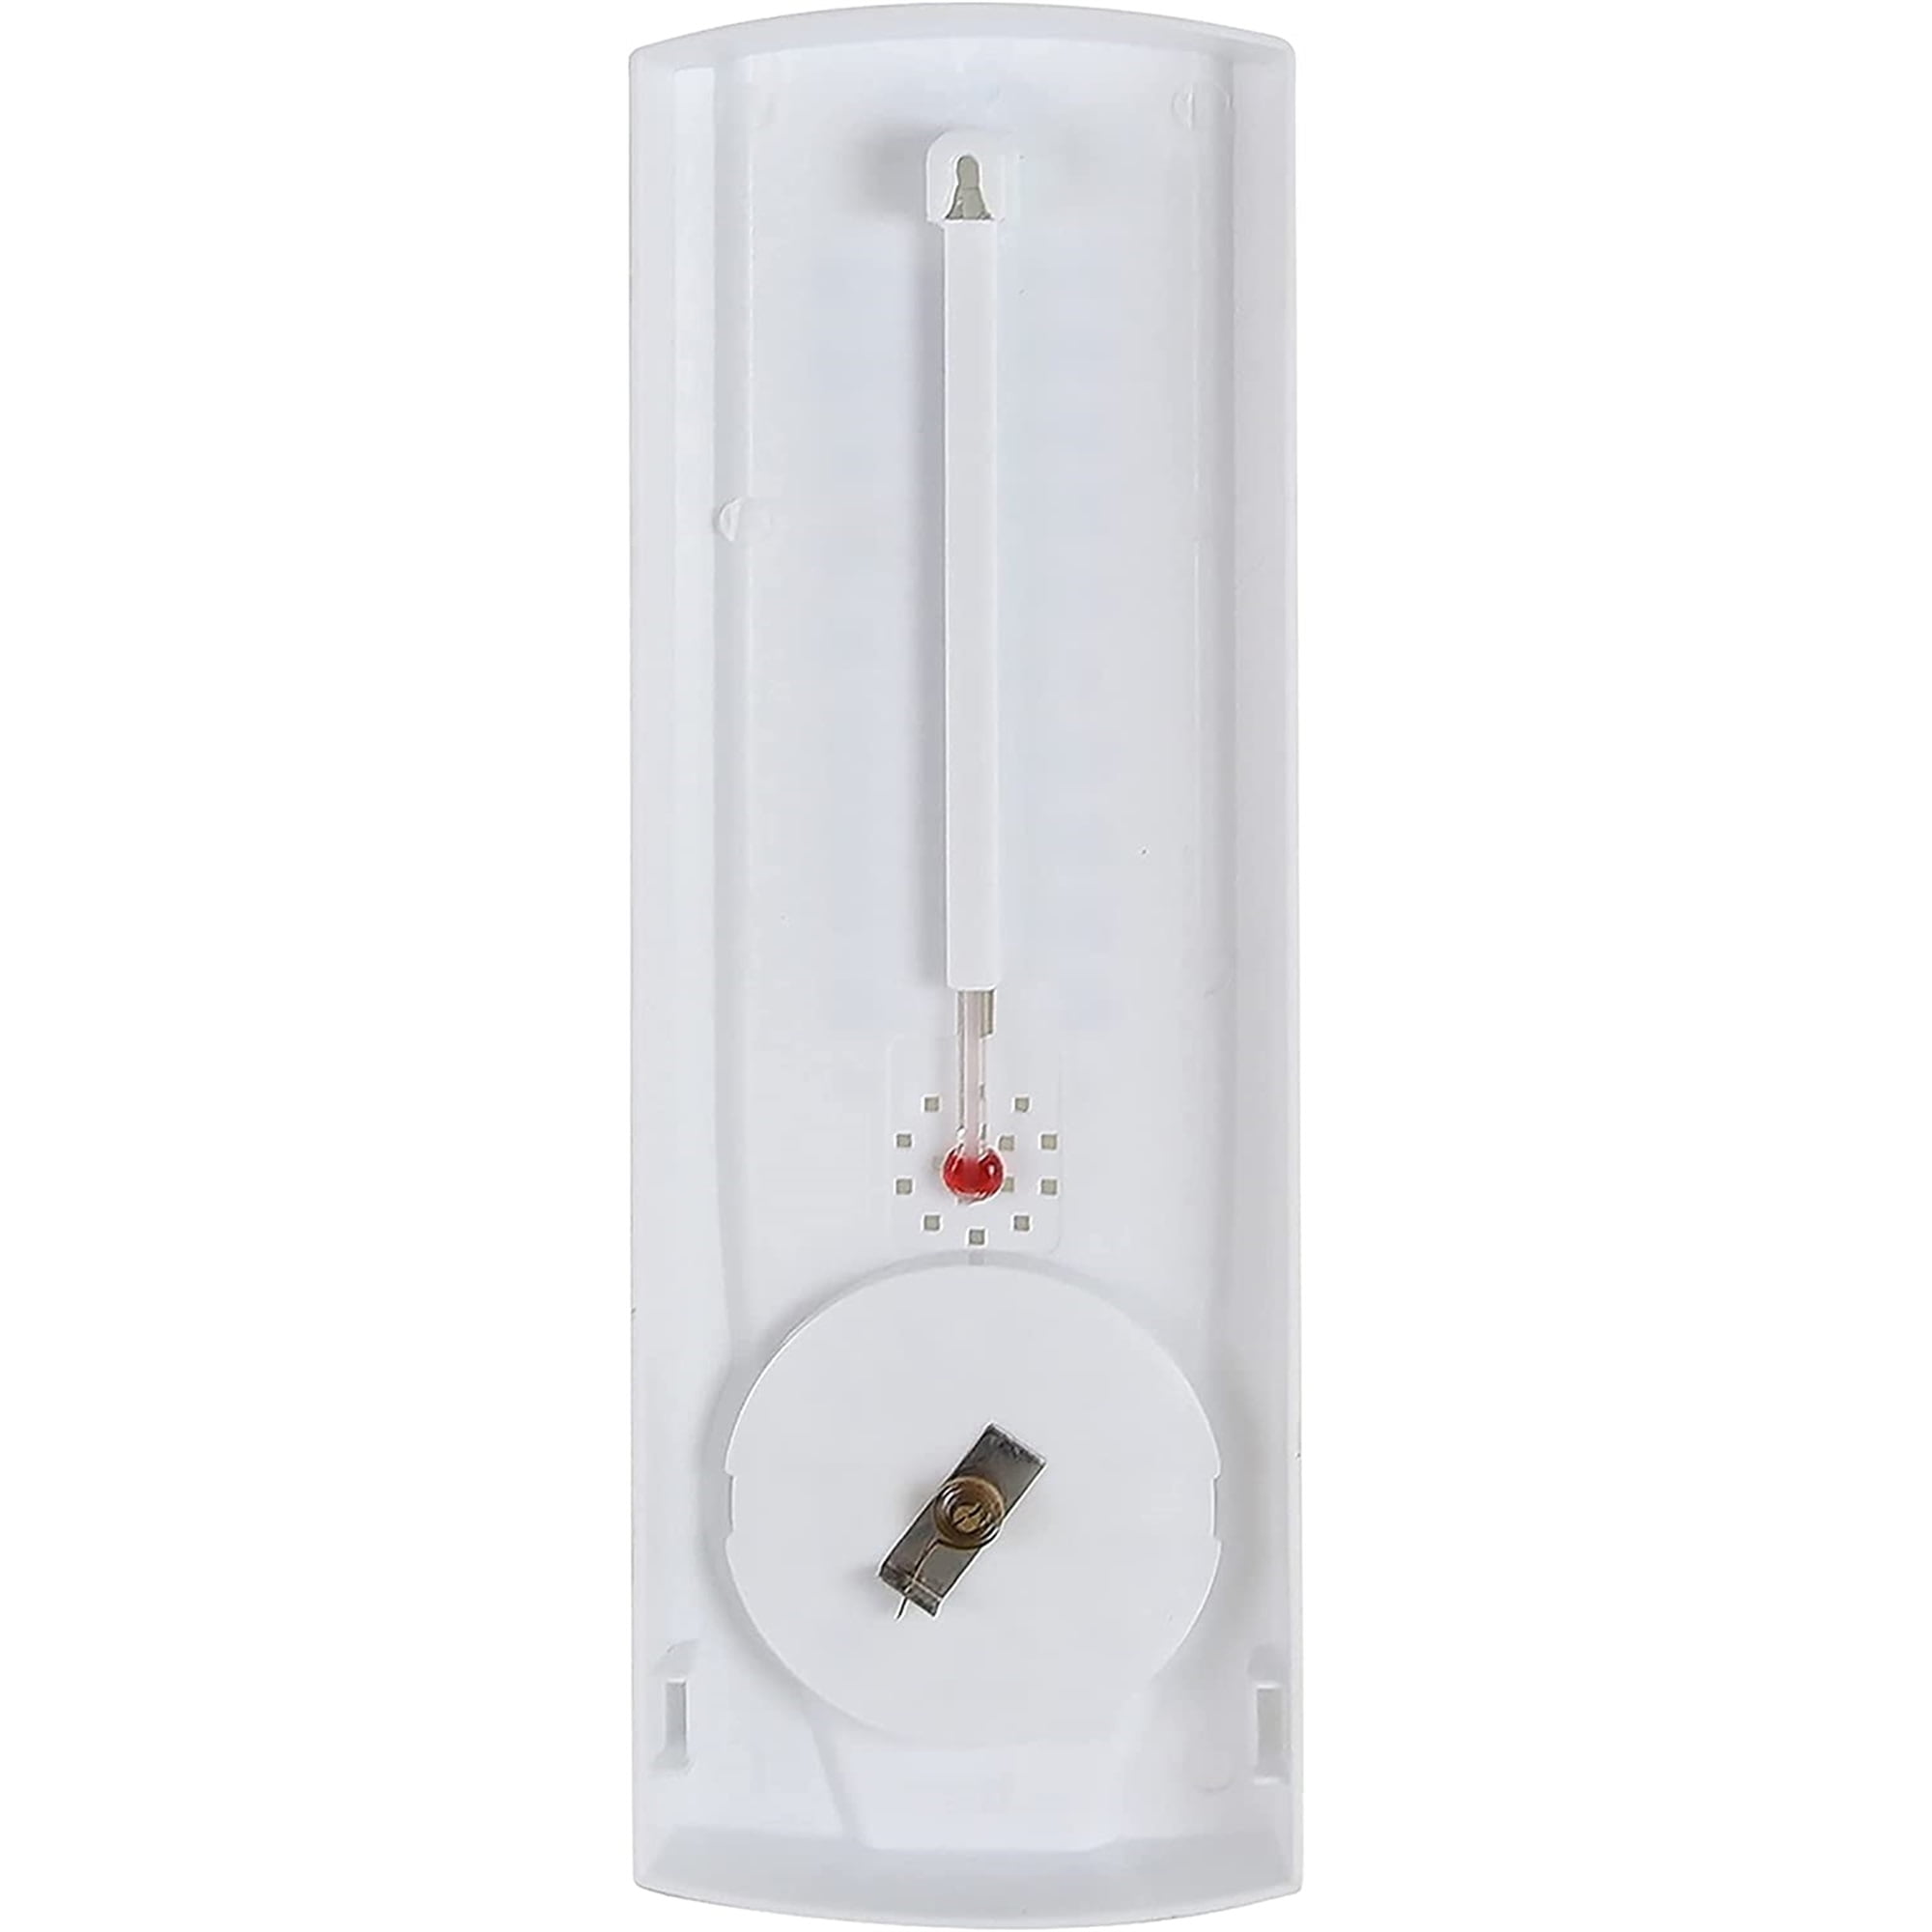 Springfield Plainview Indoor/outdoor Thermometer W/hygrometer Tap90116 :  Target